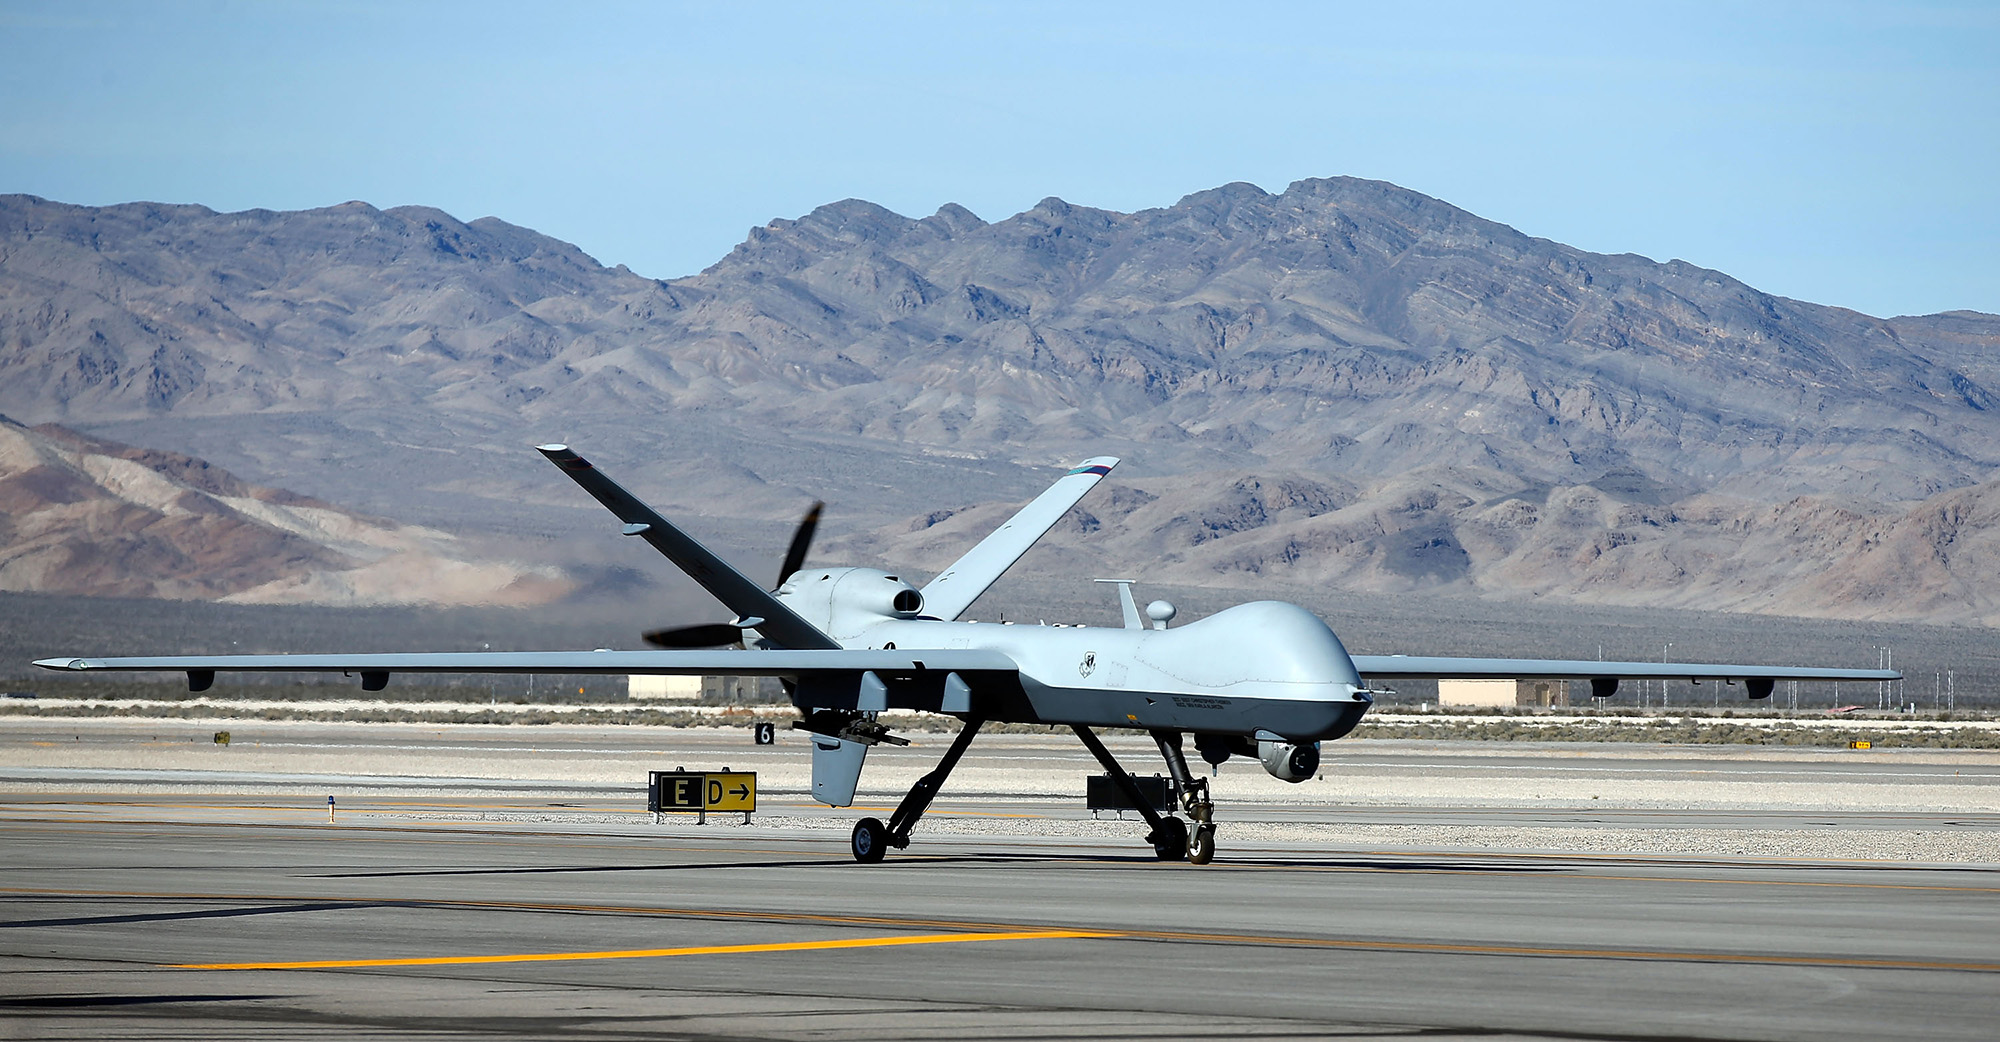 An MQ-9 Reaper remotely piloted aircraft (RPA) hovers during a training mission at Creech Air Force Base November 17, 2015, in Indian Springs, Nevada. 